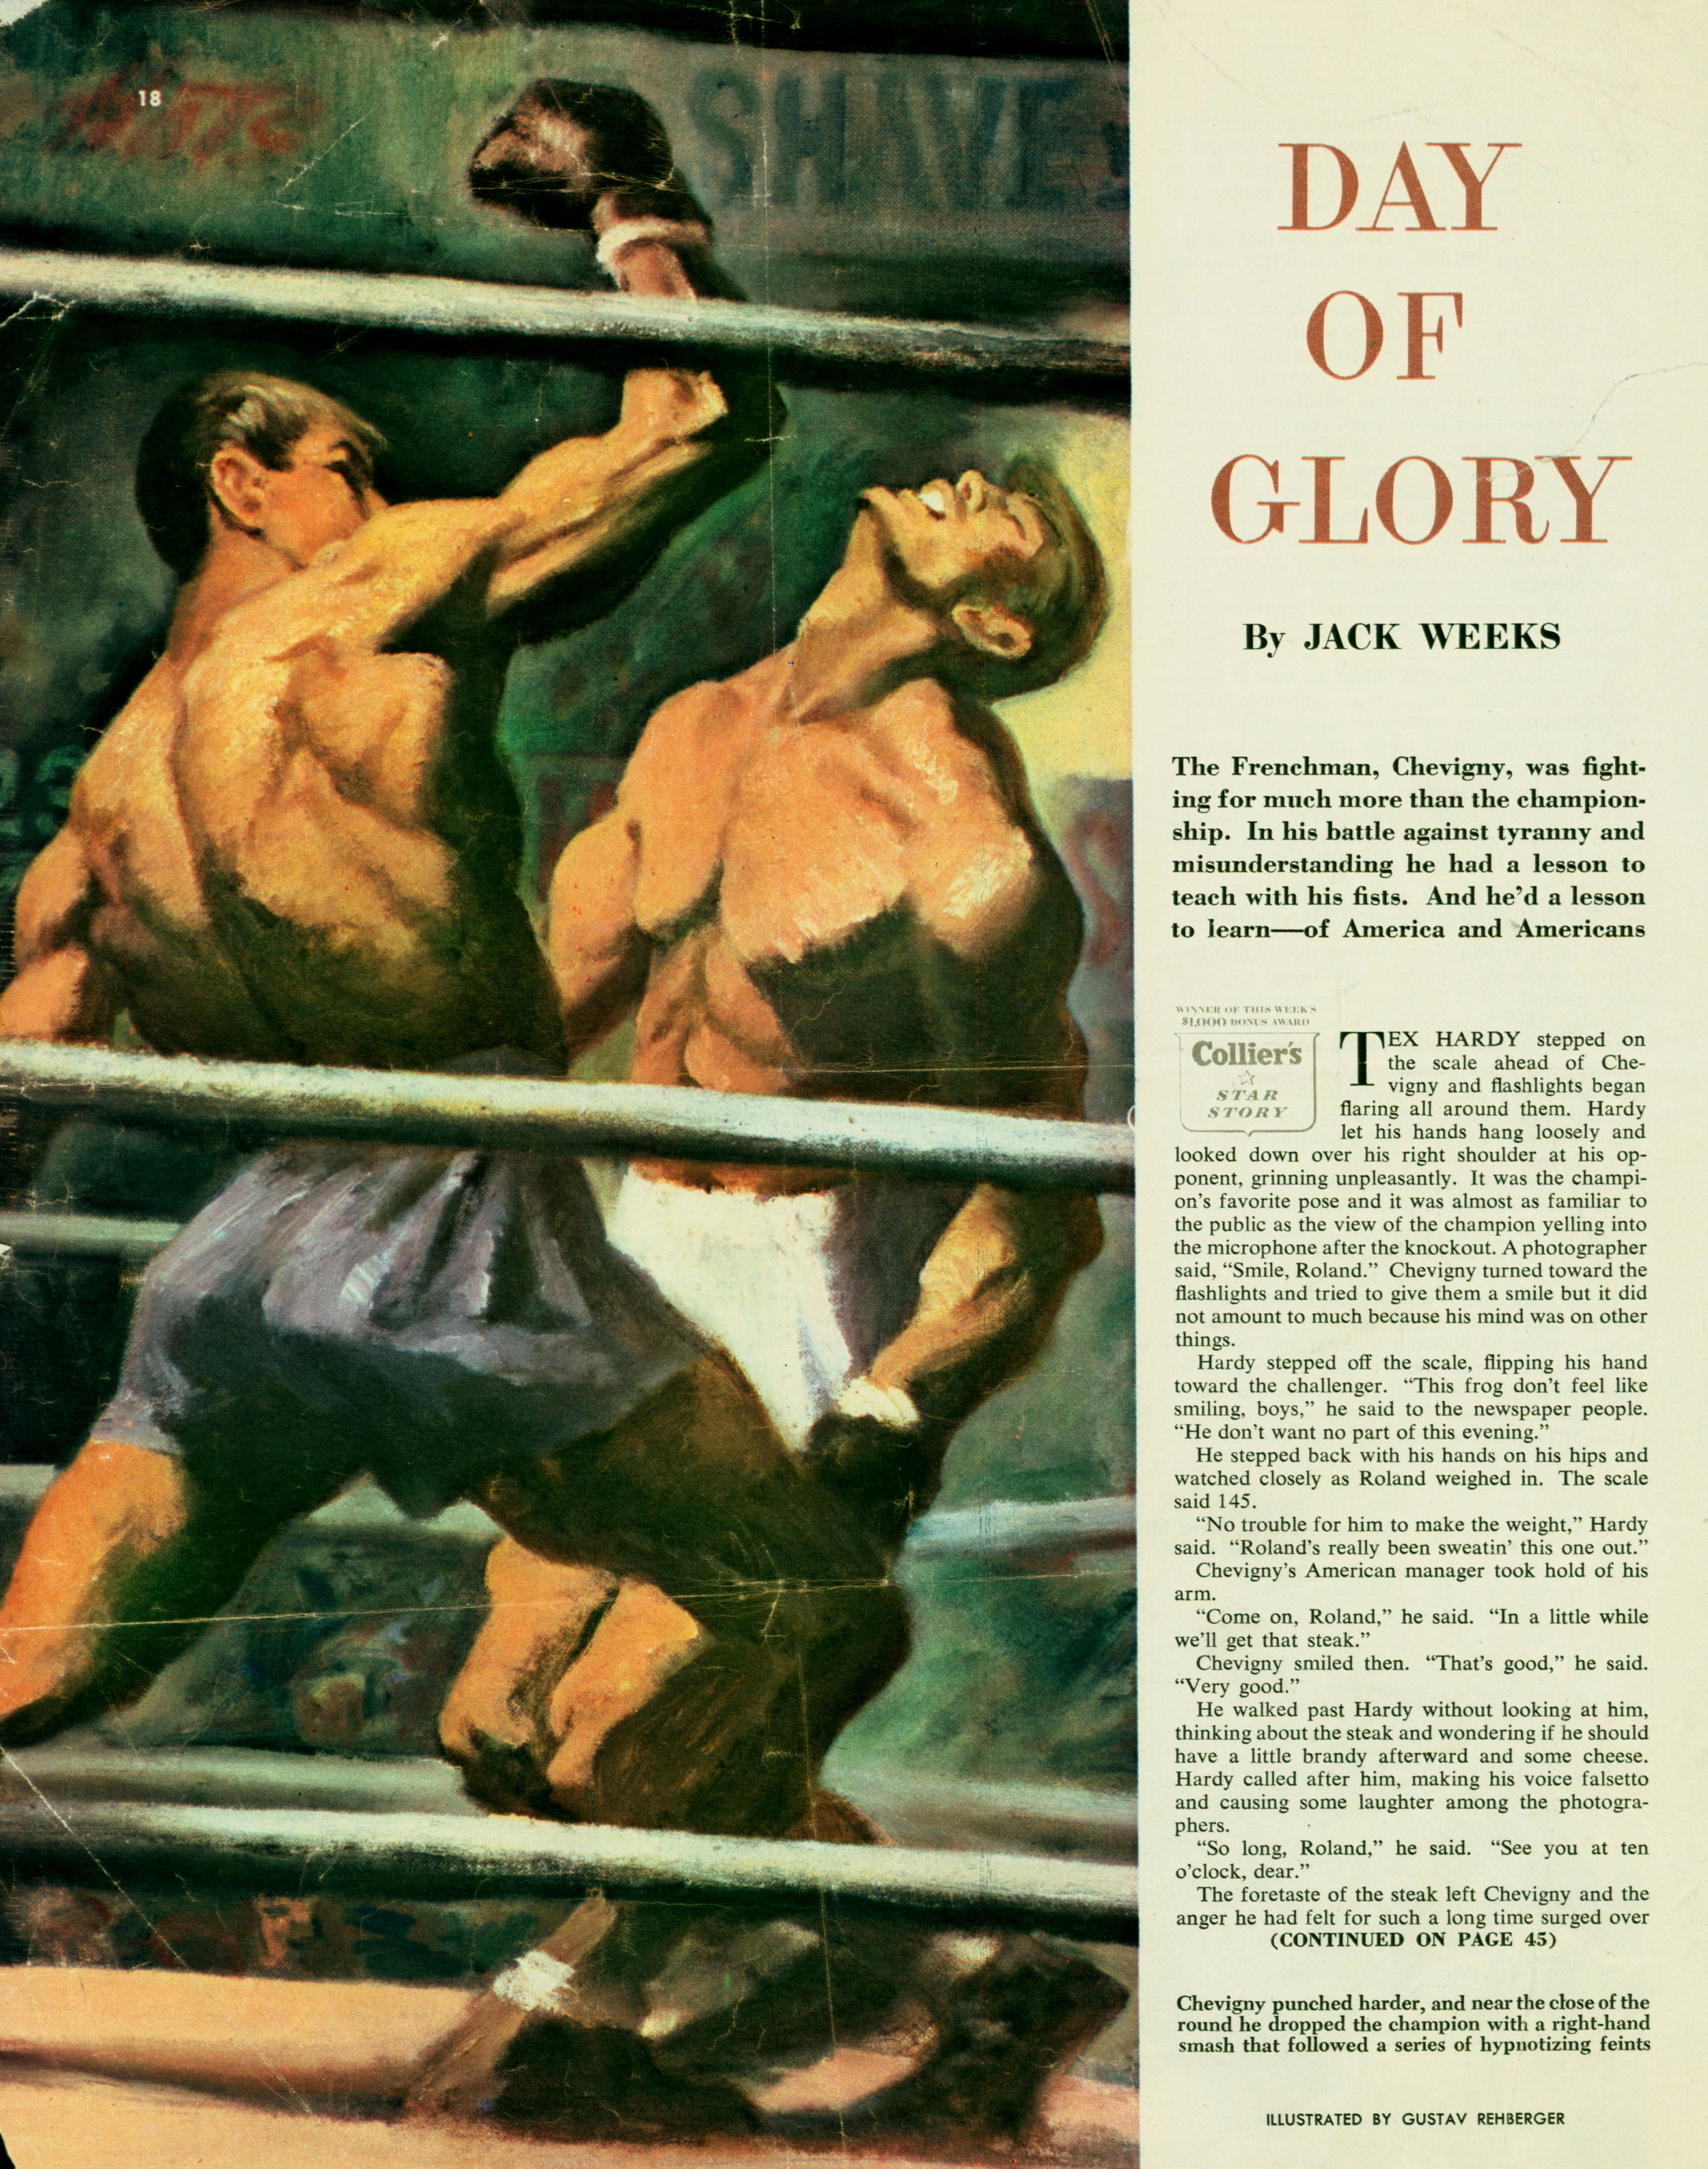 March 19, 1949 - Day of Glory